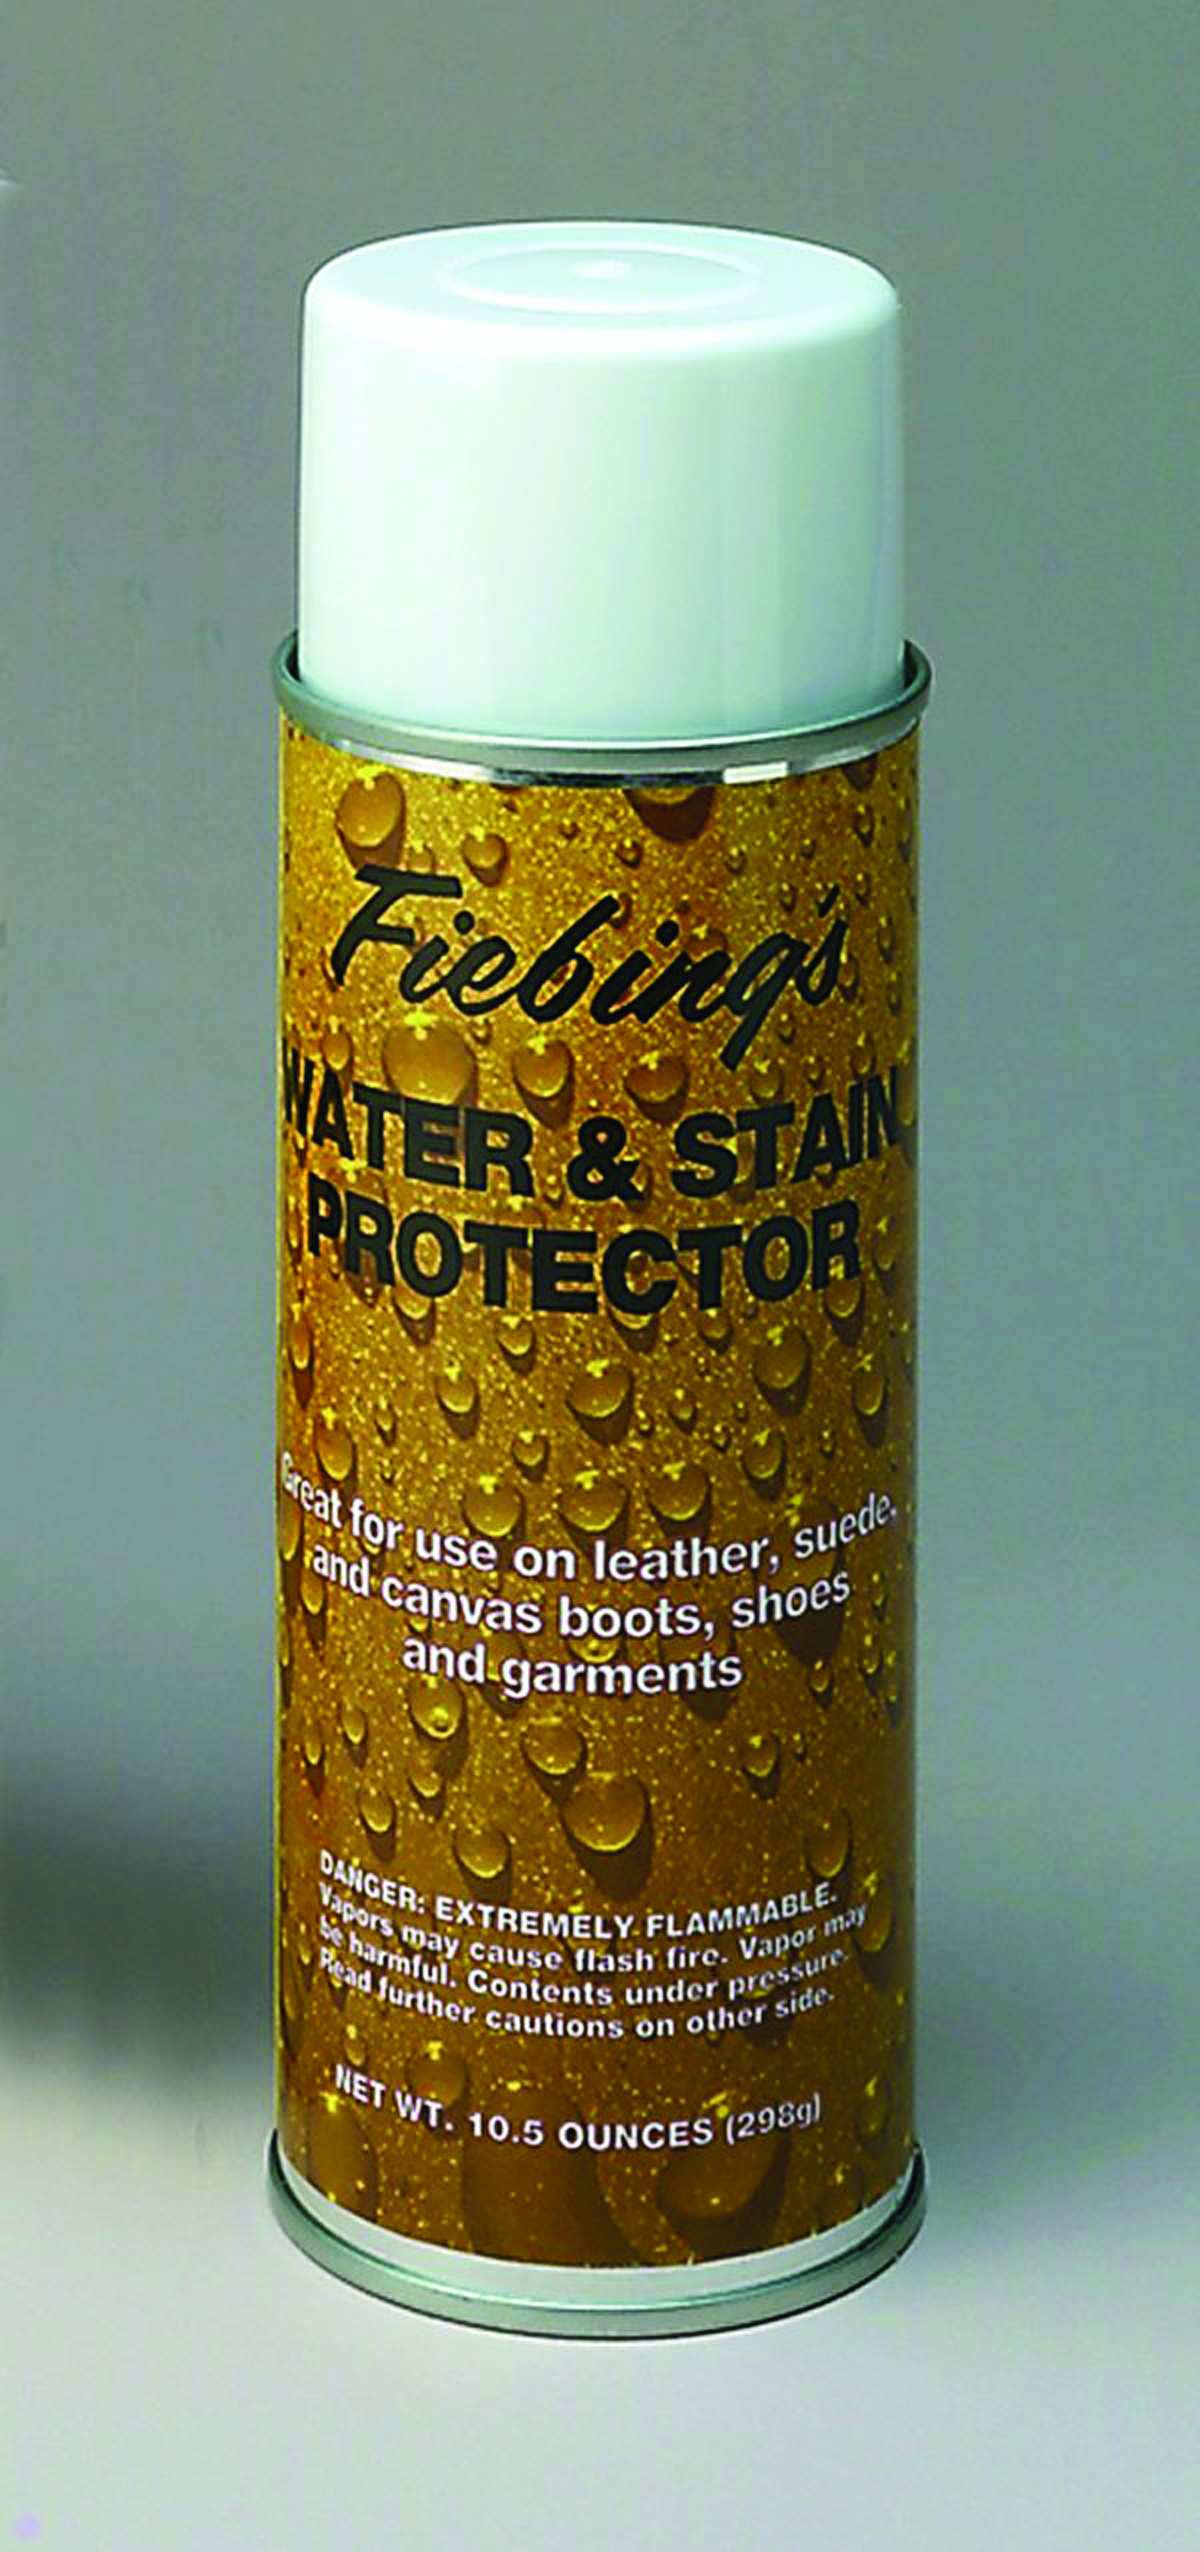 Snow Proof Water And Stain Protector Aerosol